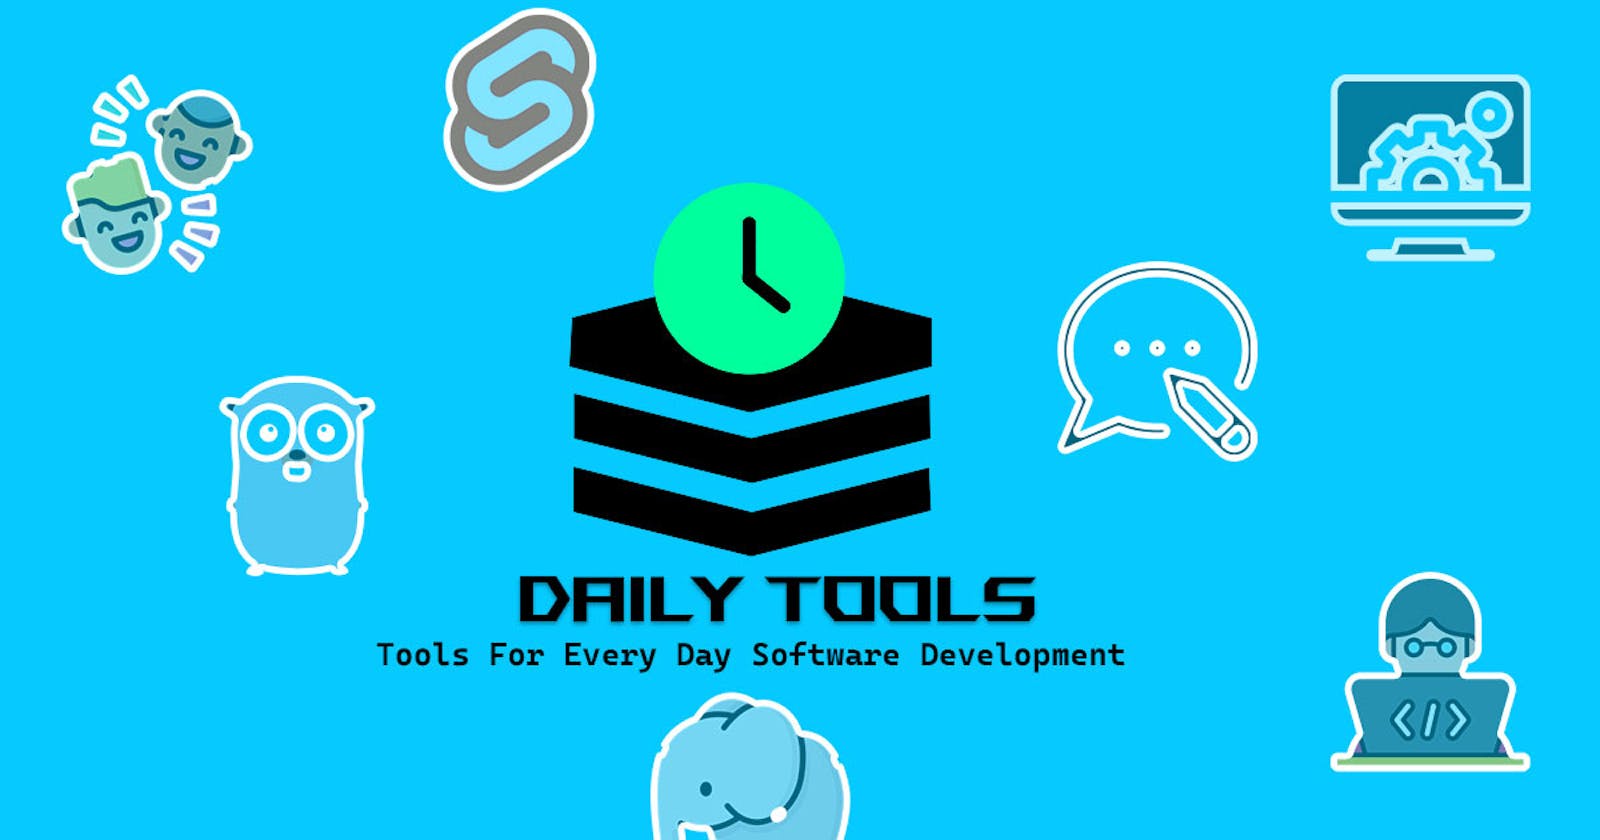 Welcome To Daily Tools